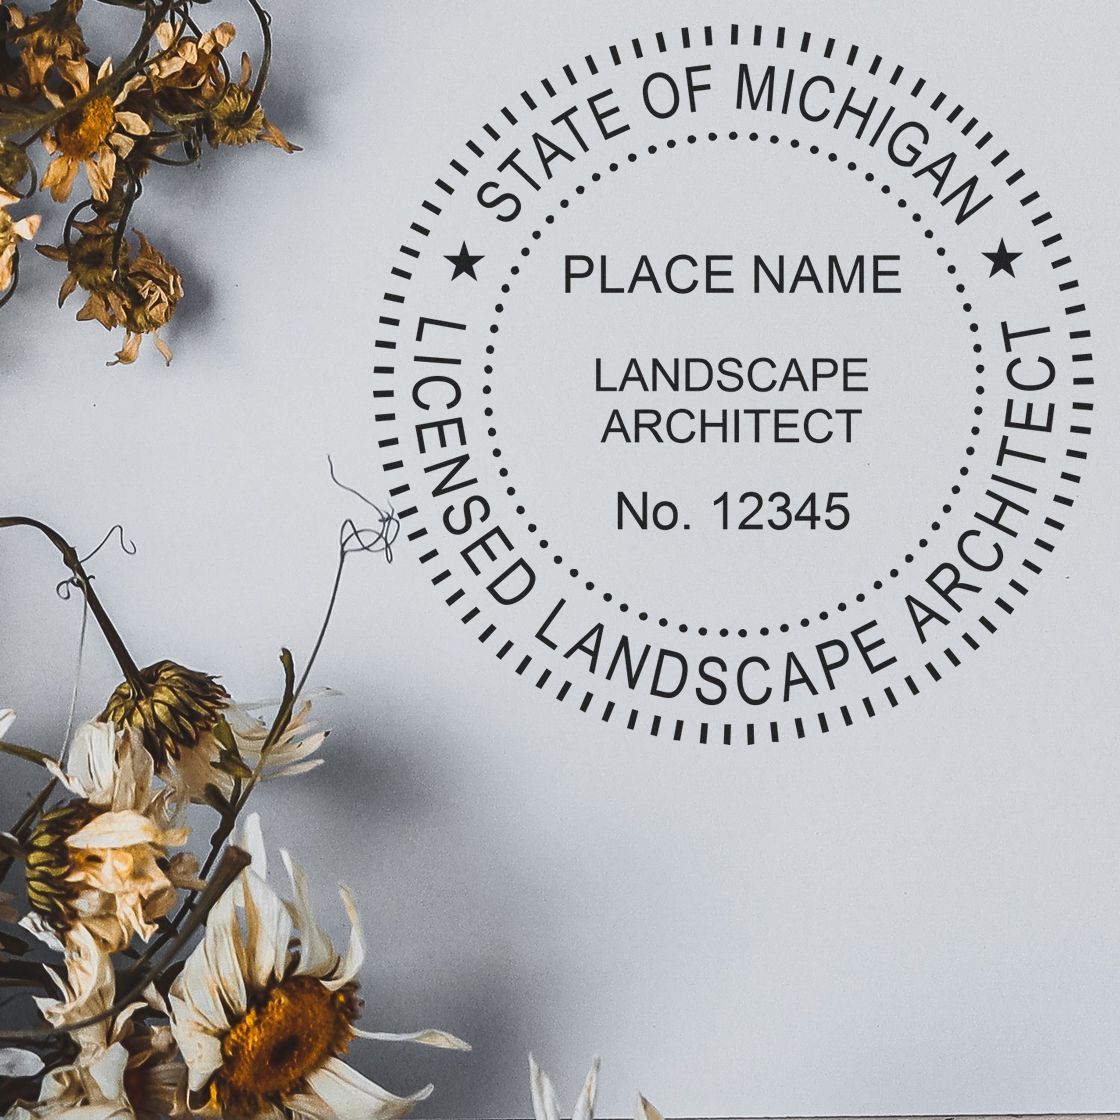 A lifestyle photo showing a stamped image of the Digital Michigan Landscape Architect Stamp on a piece of paper